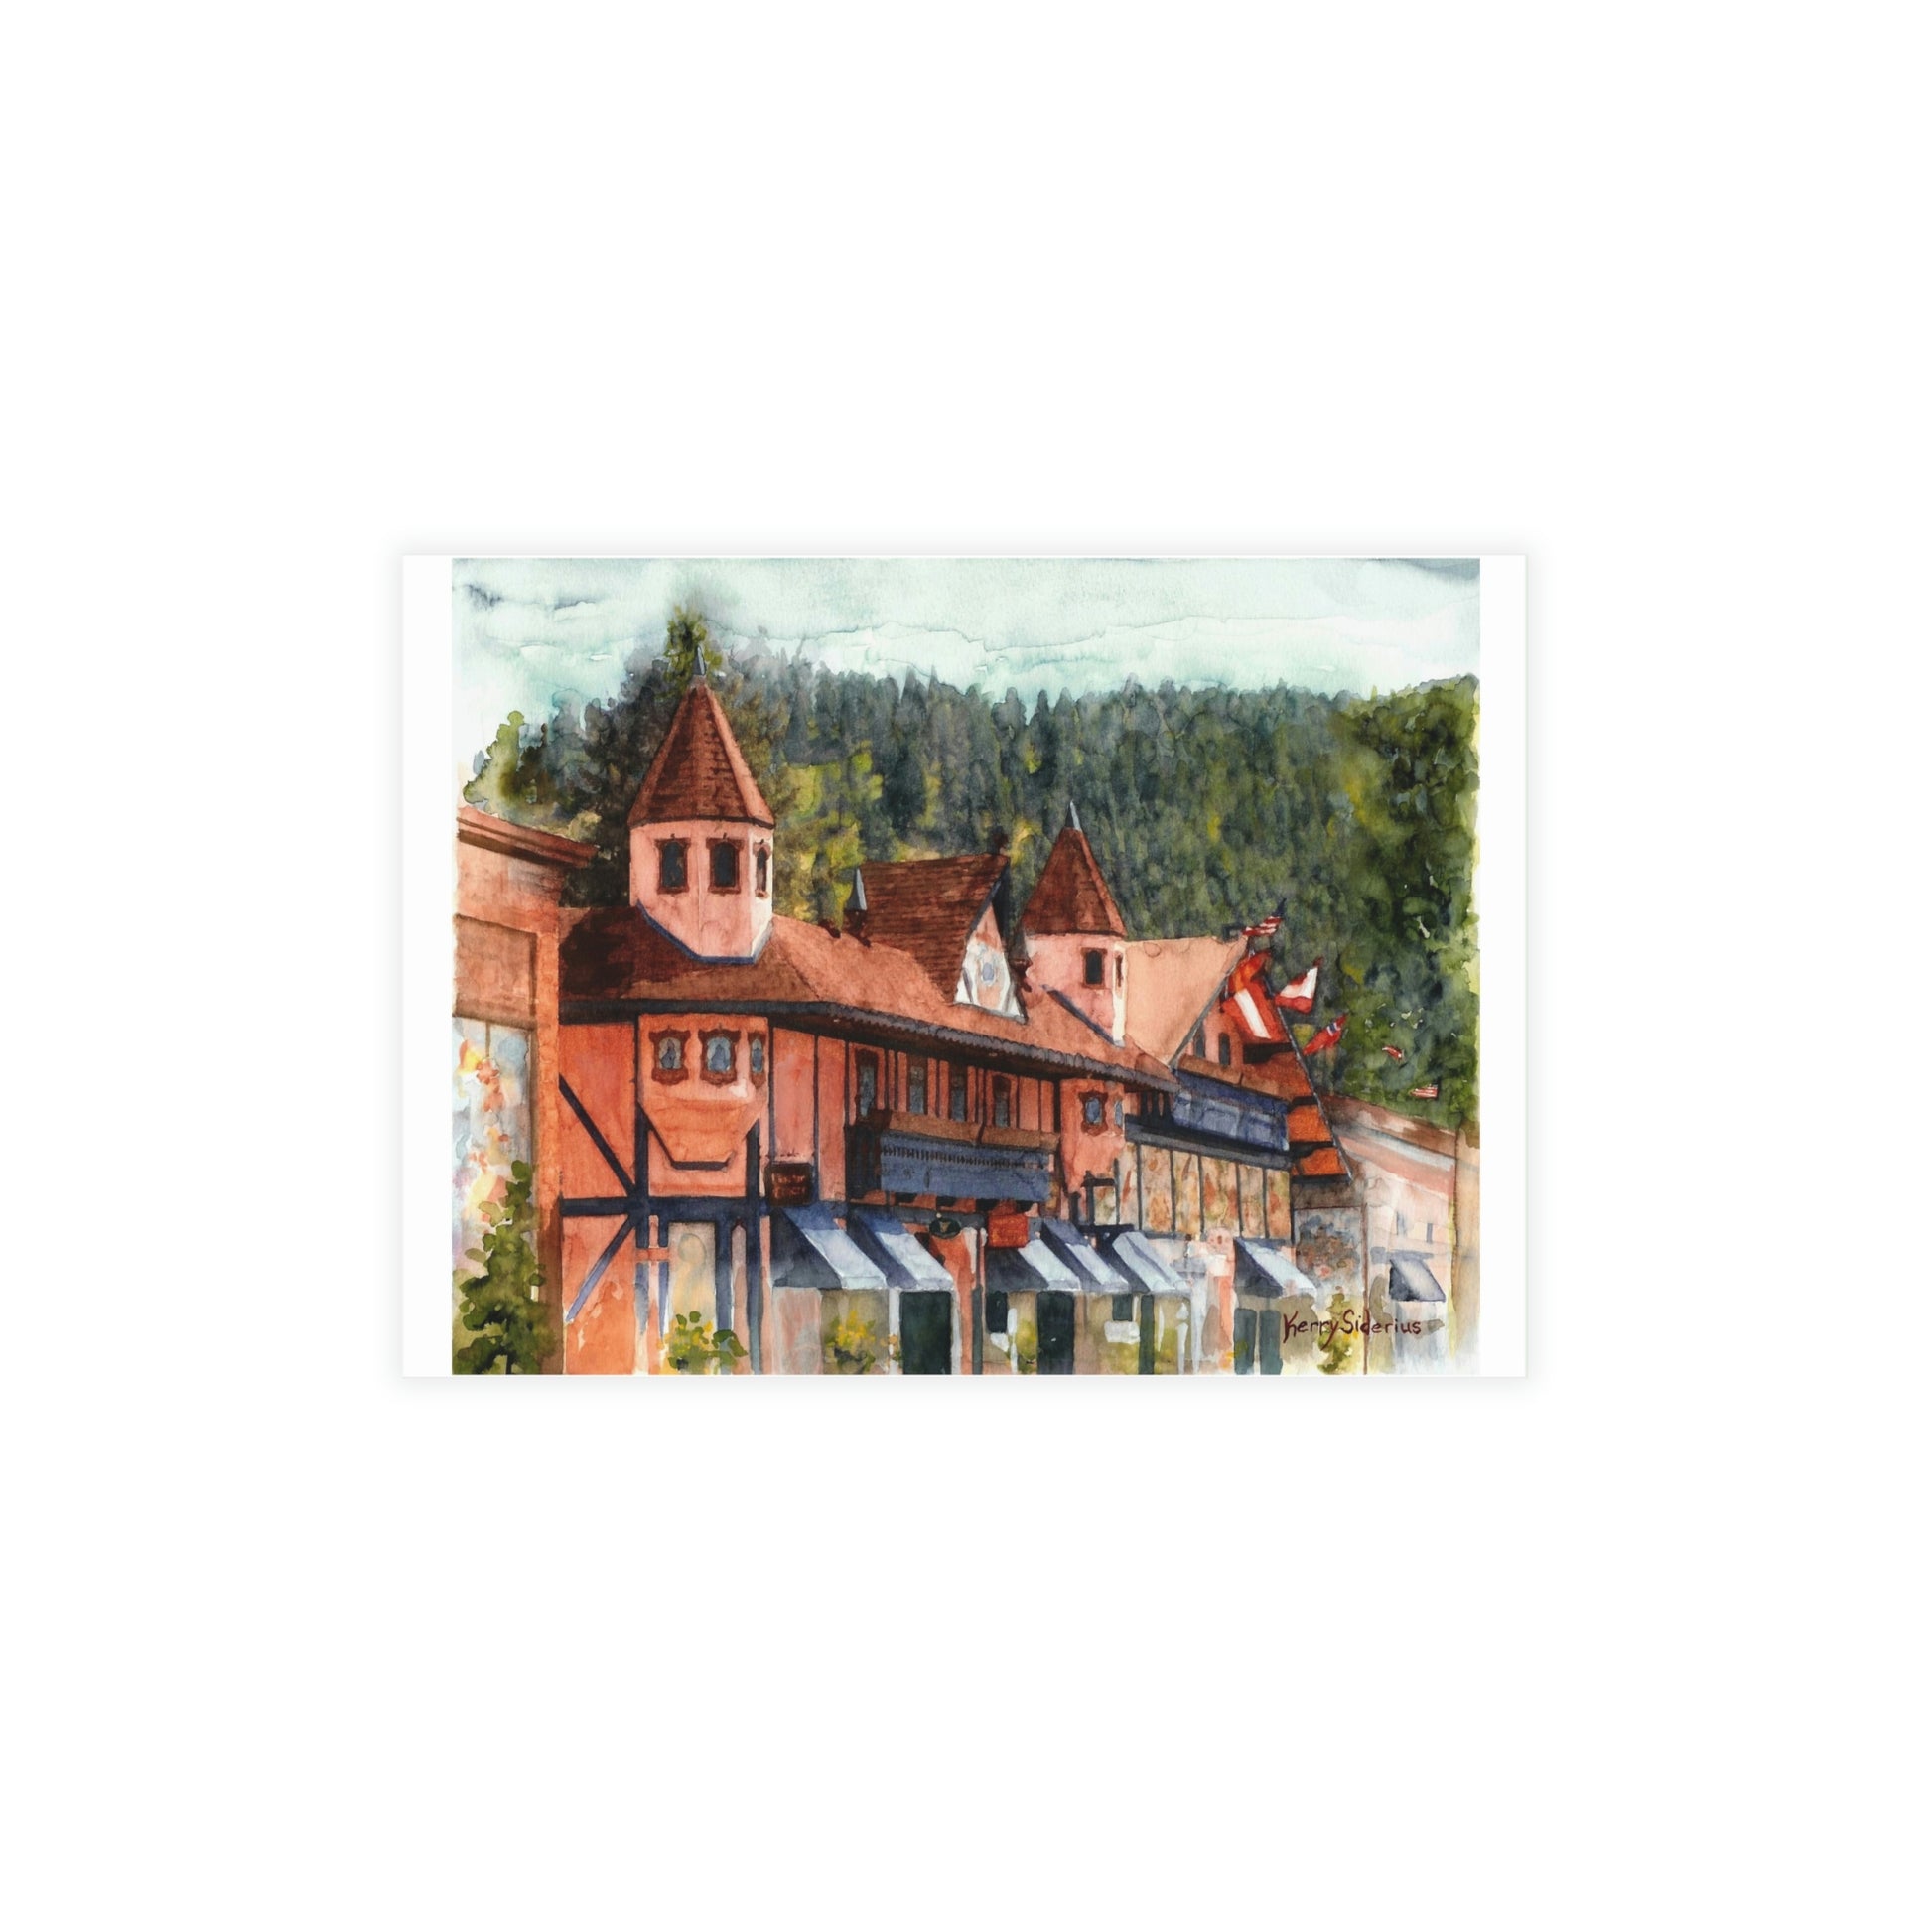 "Leavenworth Street" Greeting Cards (Envelopes Included) - Kerry Siderius Art 